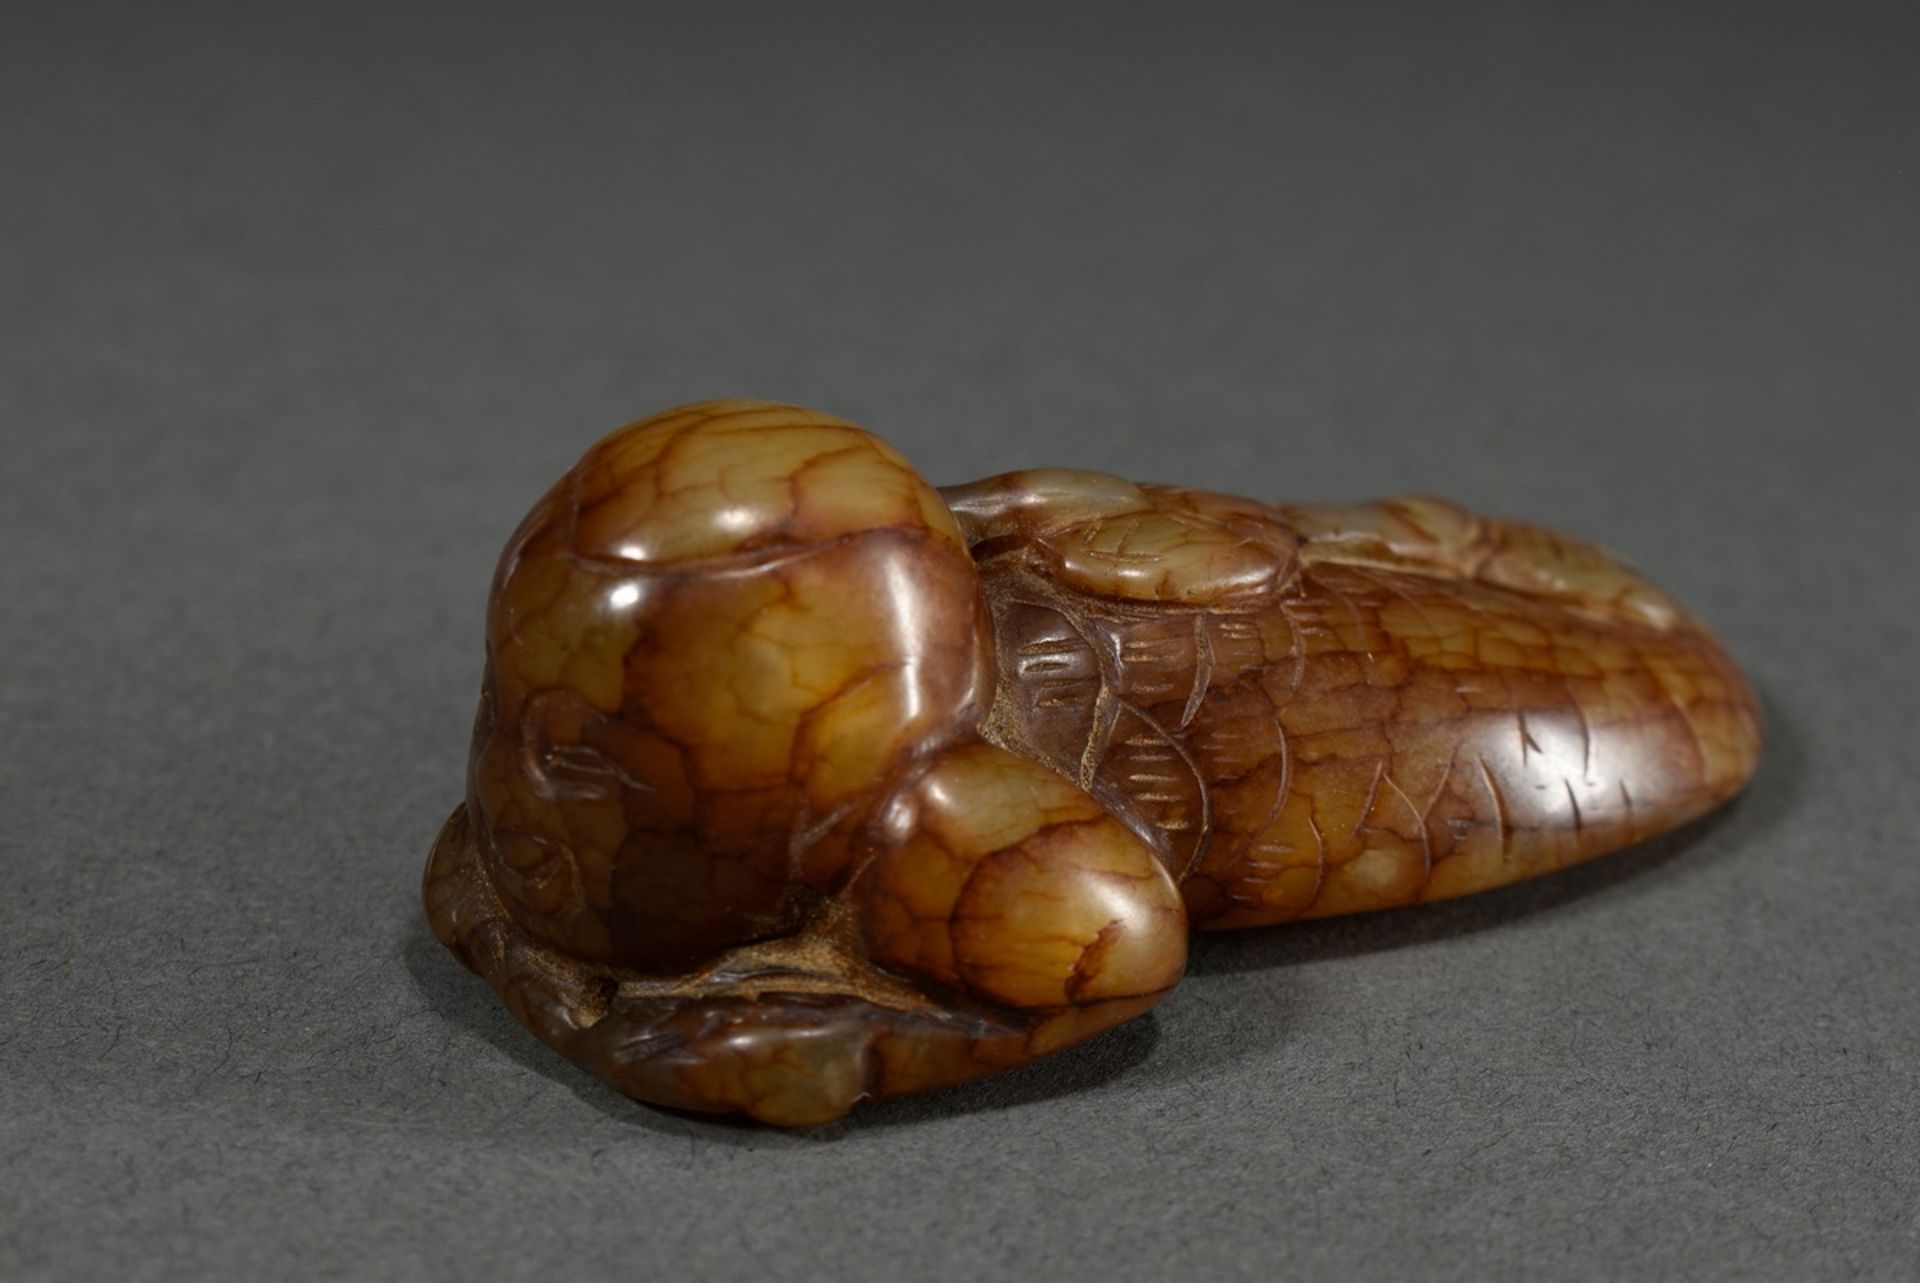 Fine figure of brown veined jade "Lying Mermaid", Ming or later, China, l. 7.5cm - Image 3 of 6